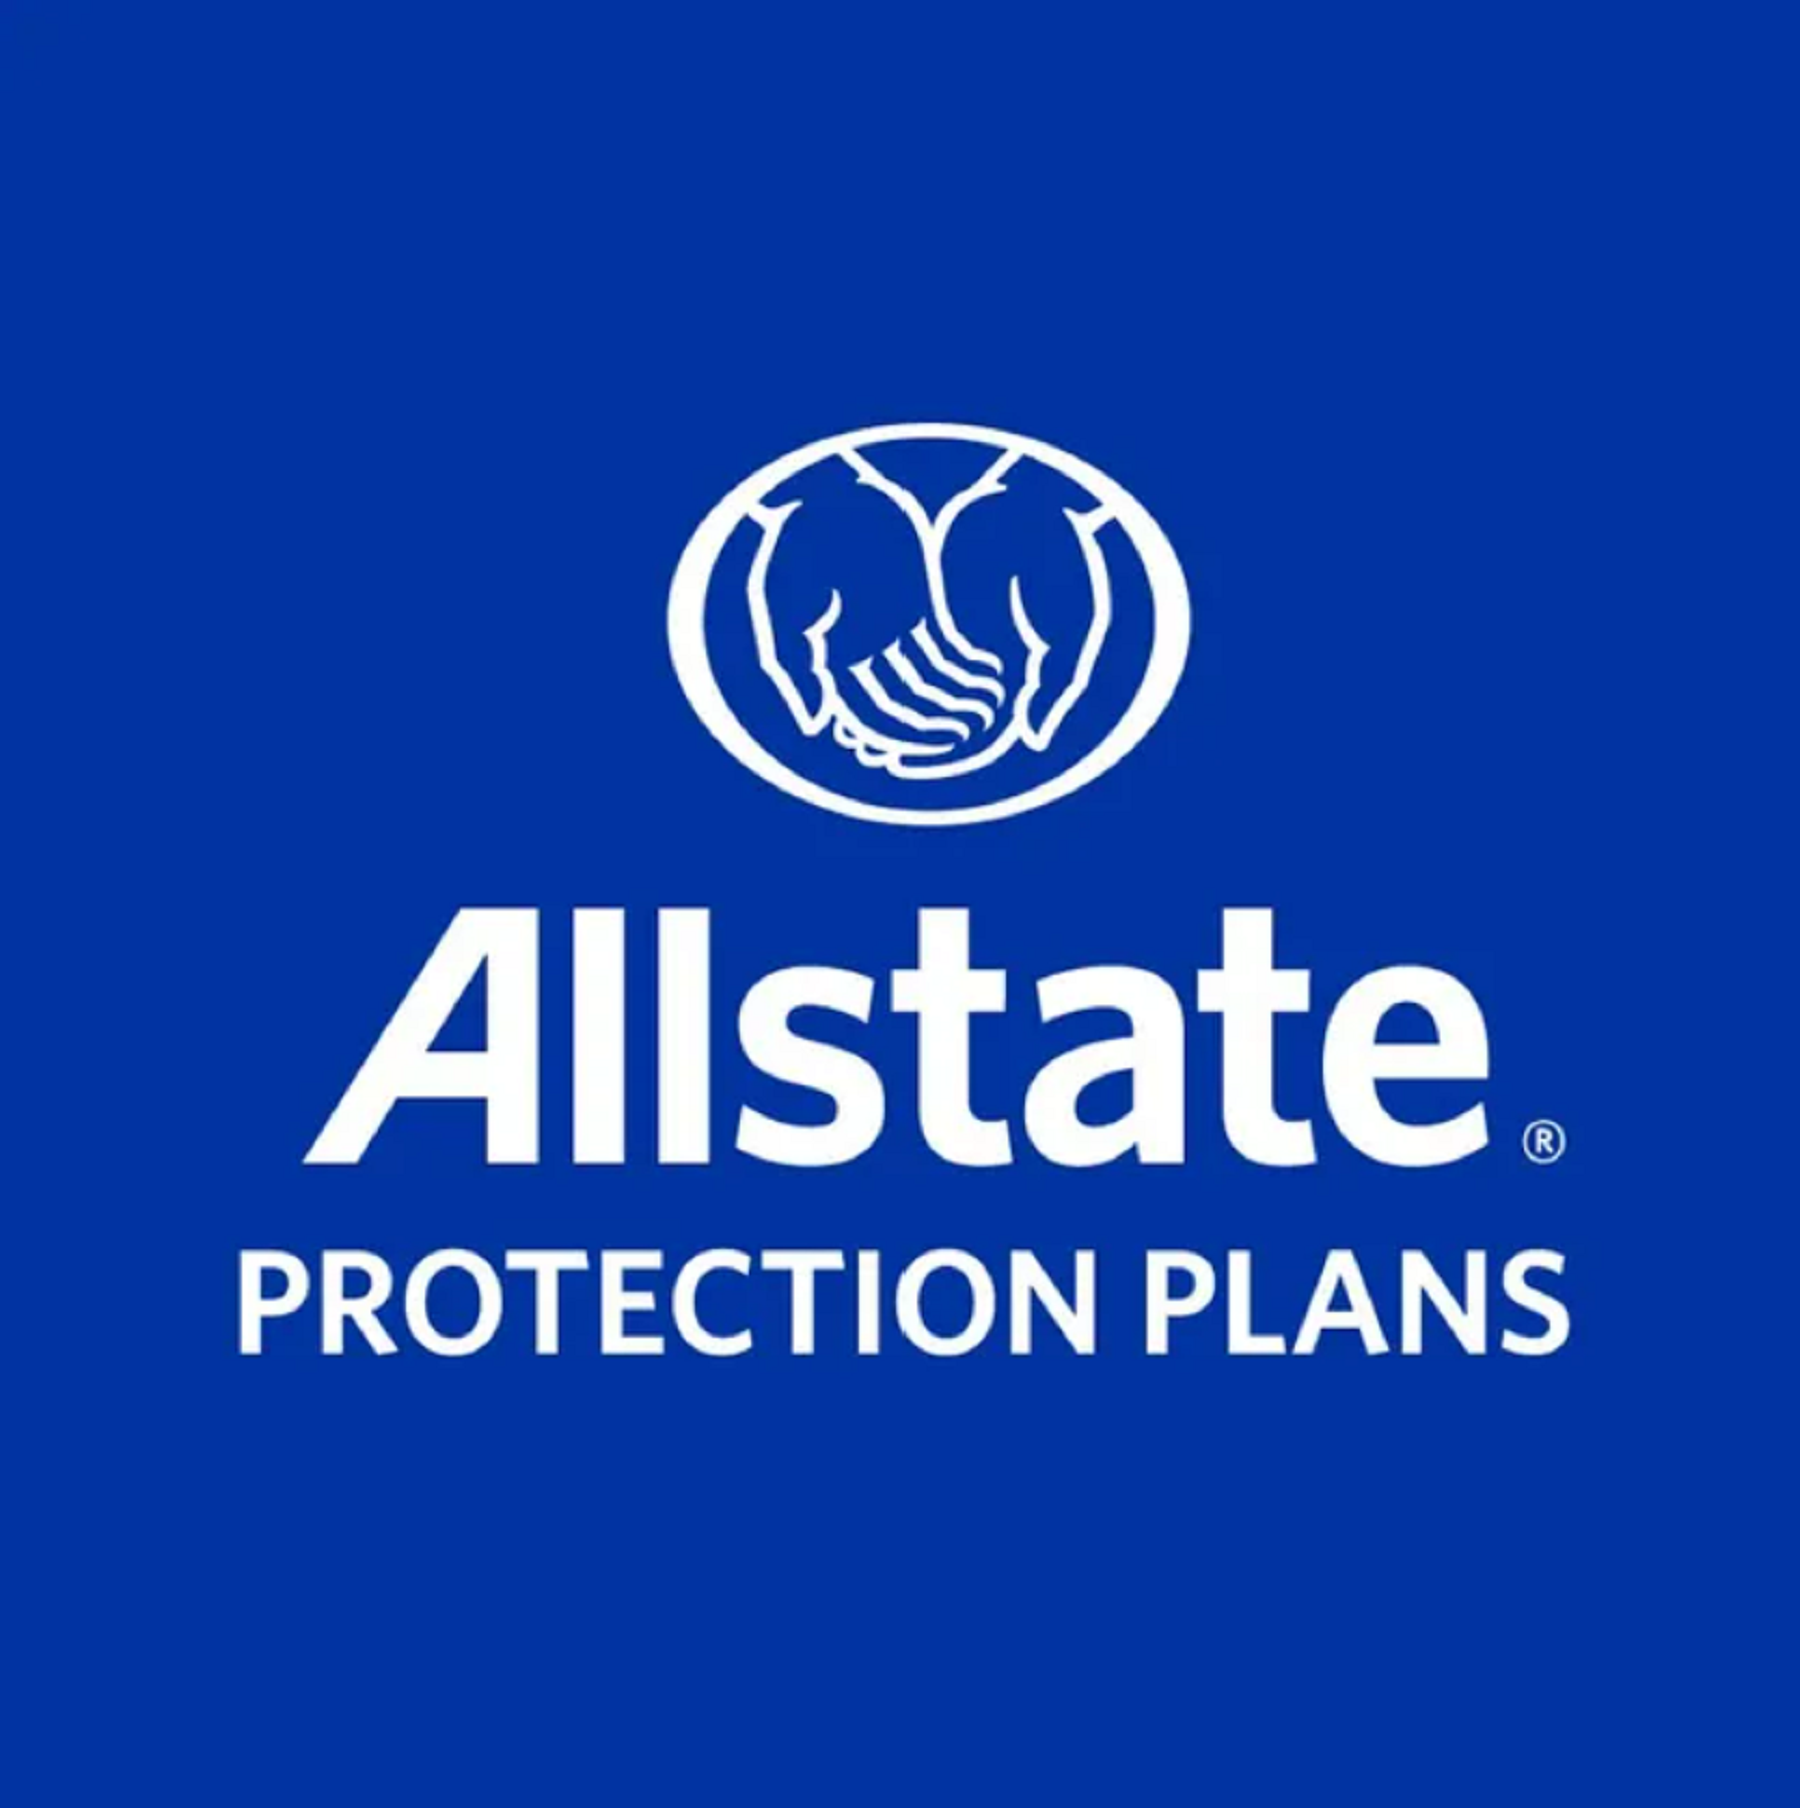 Allstate Protection Plans explores whether the more sustainable Samsung Galaxy S23 phones are more susceptible to accidental damage